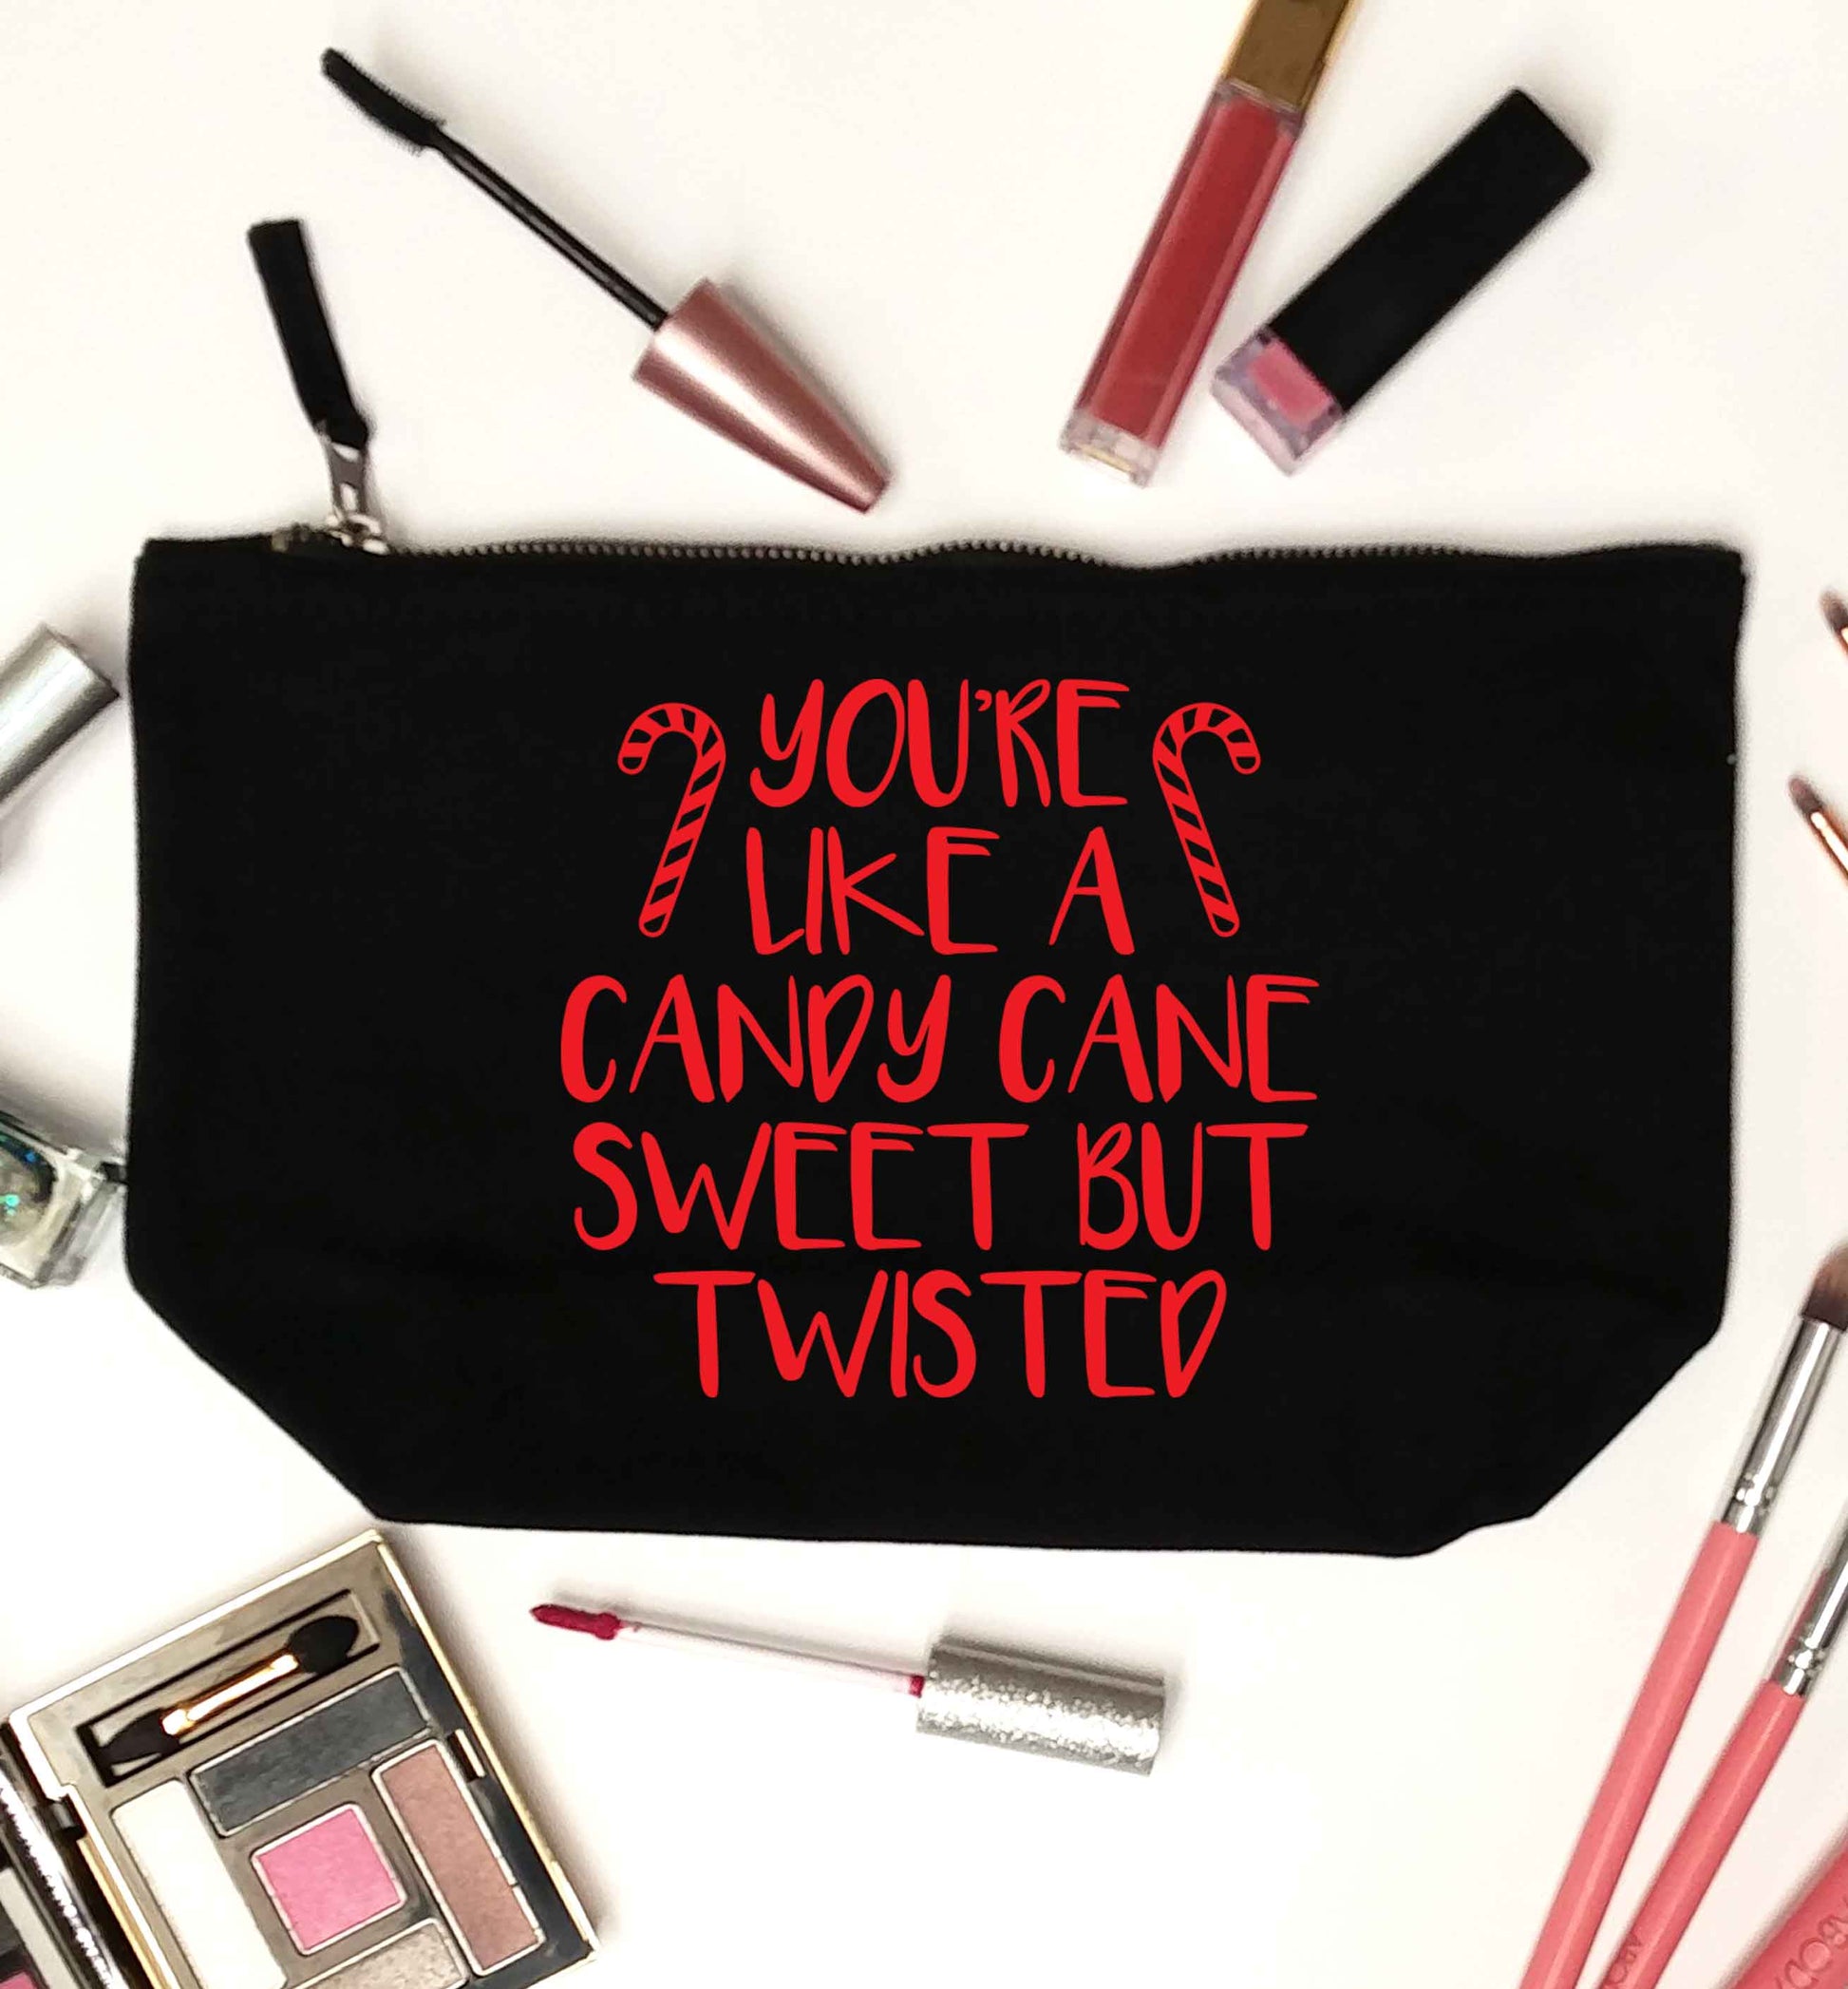 You're like a candy cane sweet but twisted black makeup bag